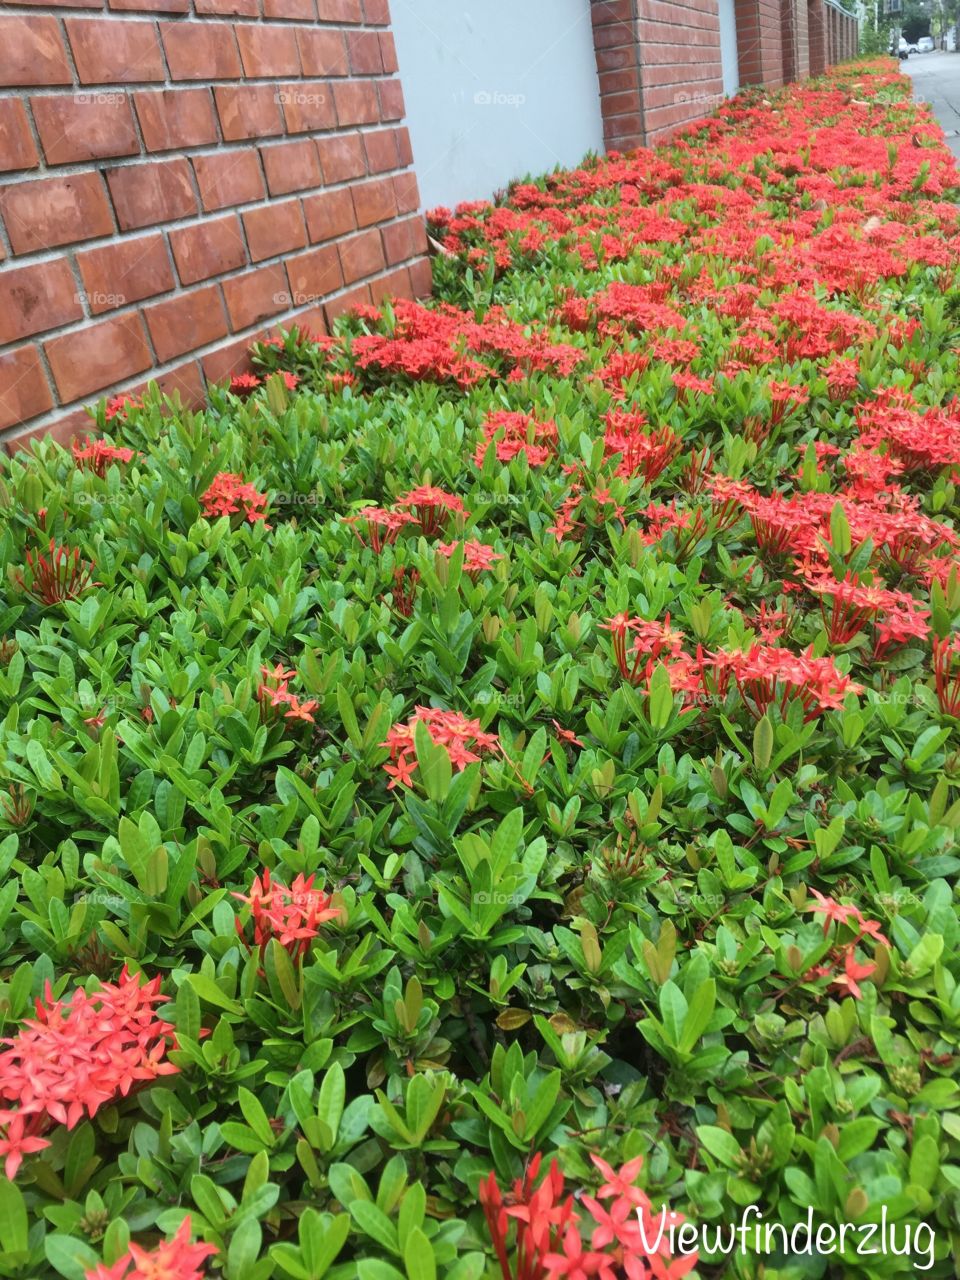 Ixora flowers - it is commonly known as West Indian Jasmine.